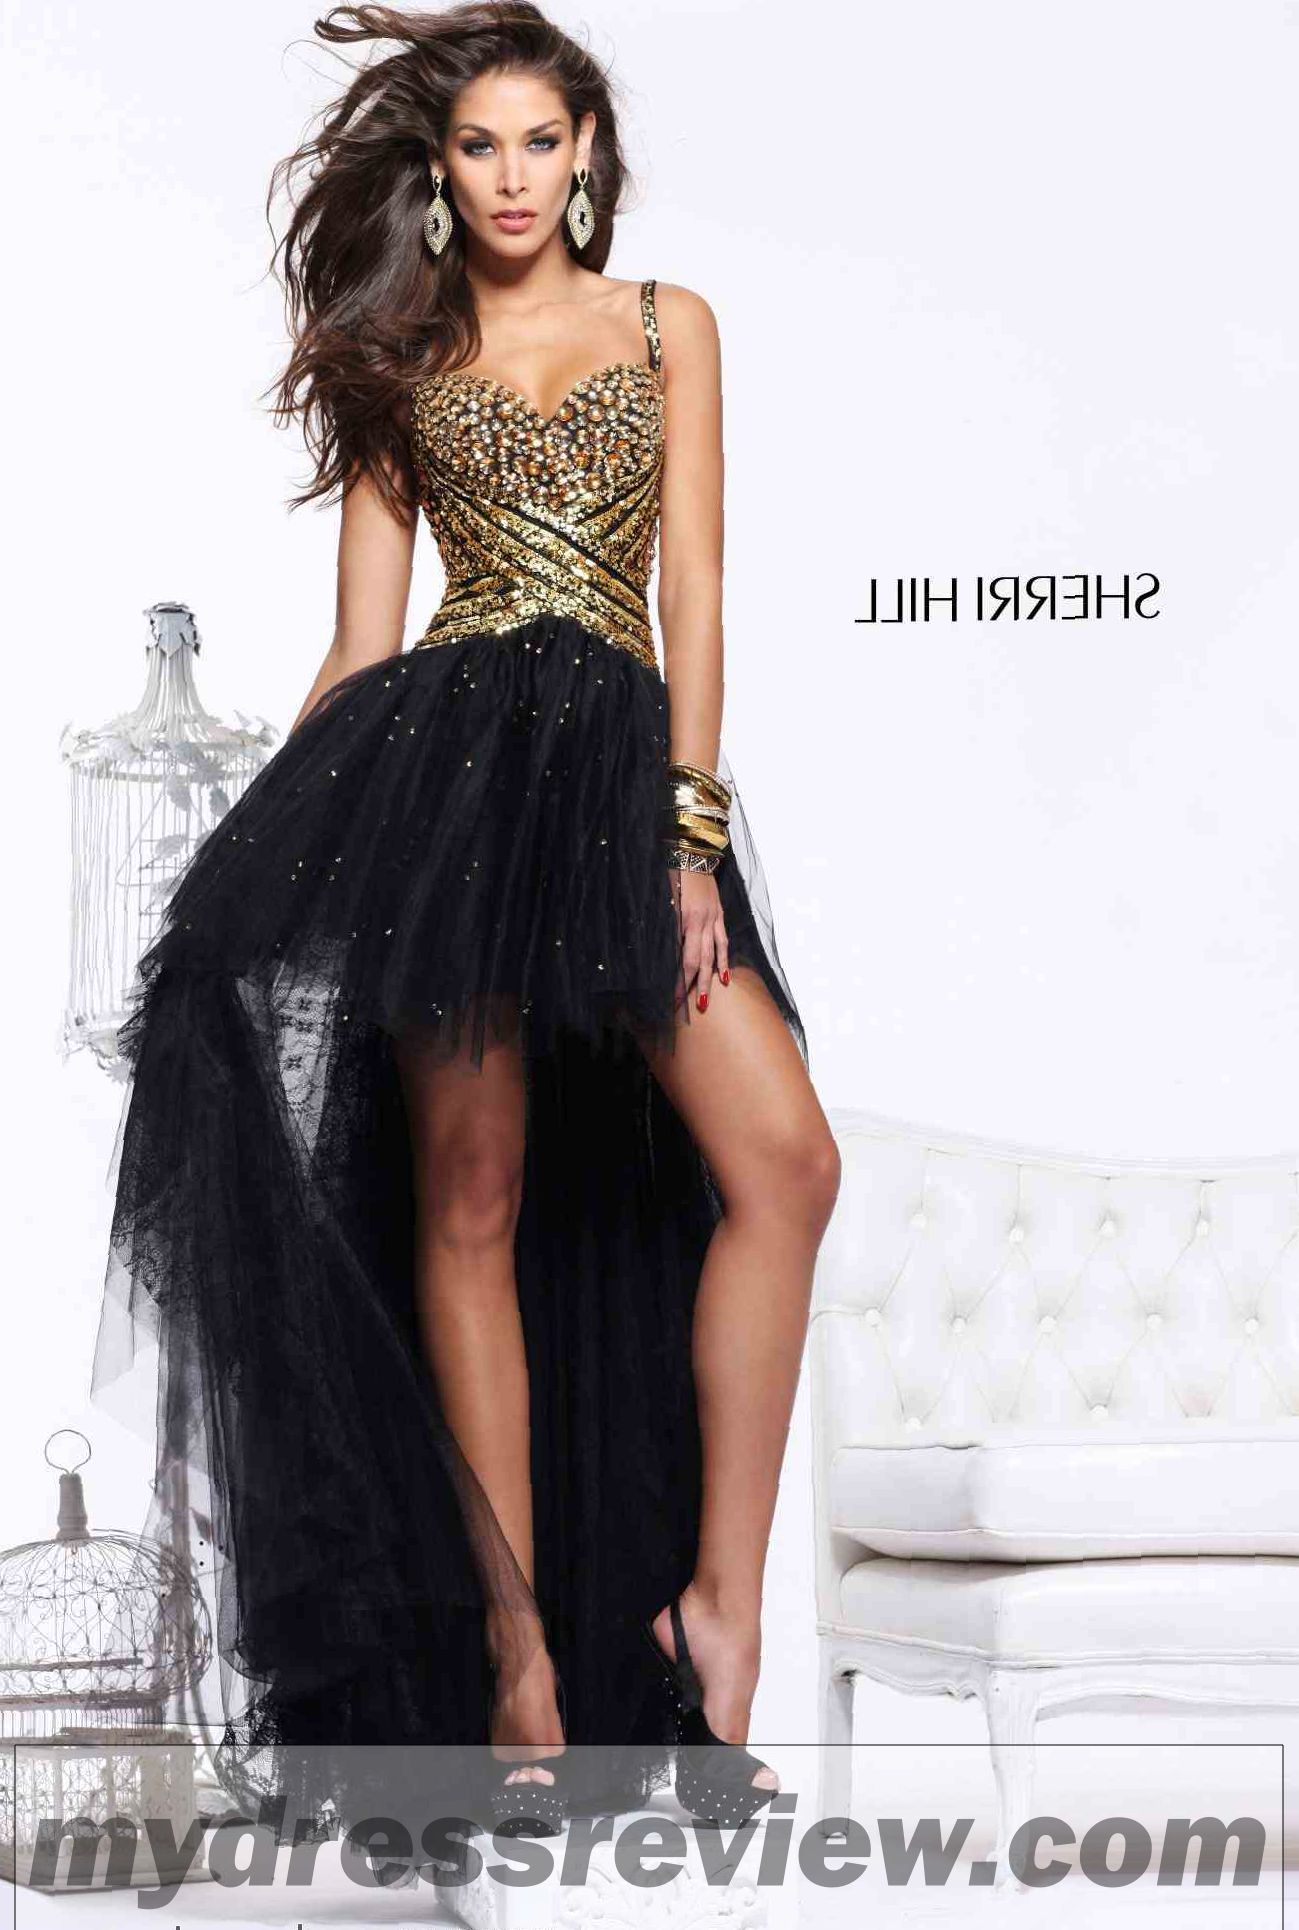 Formal Dresses Black And Gold And New Fashion Collection